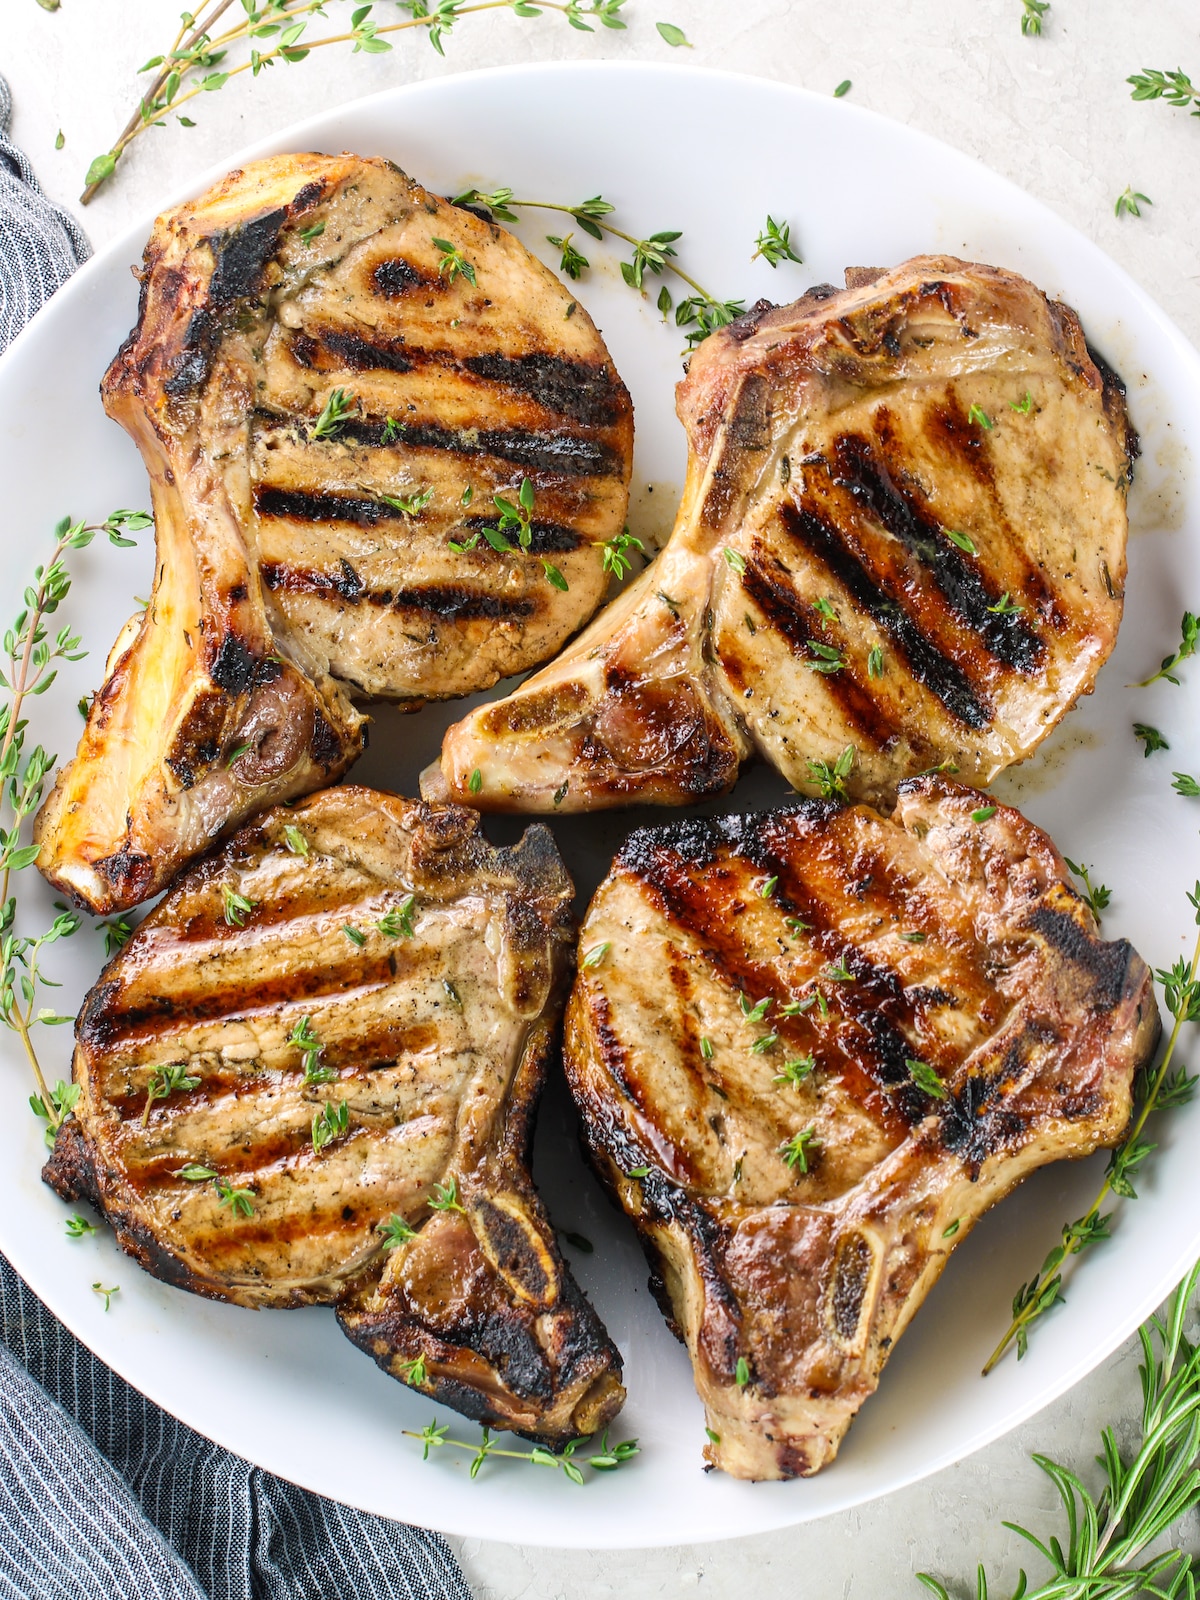 Four grilled pork chops on a plate.